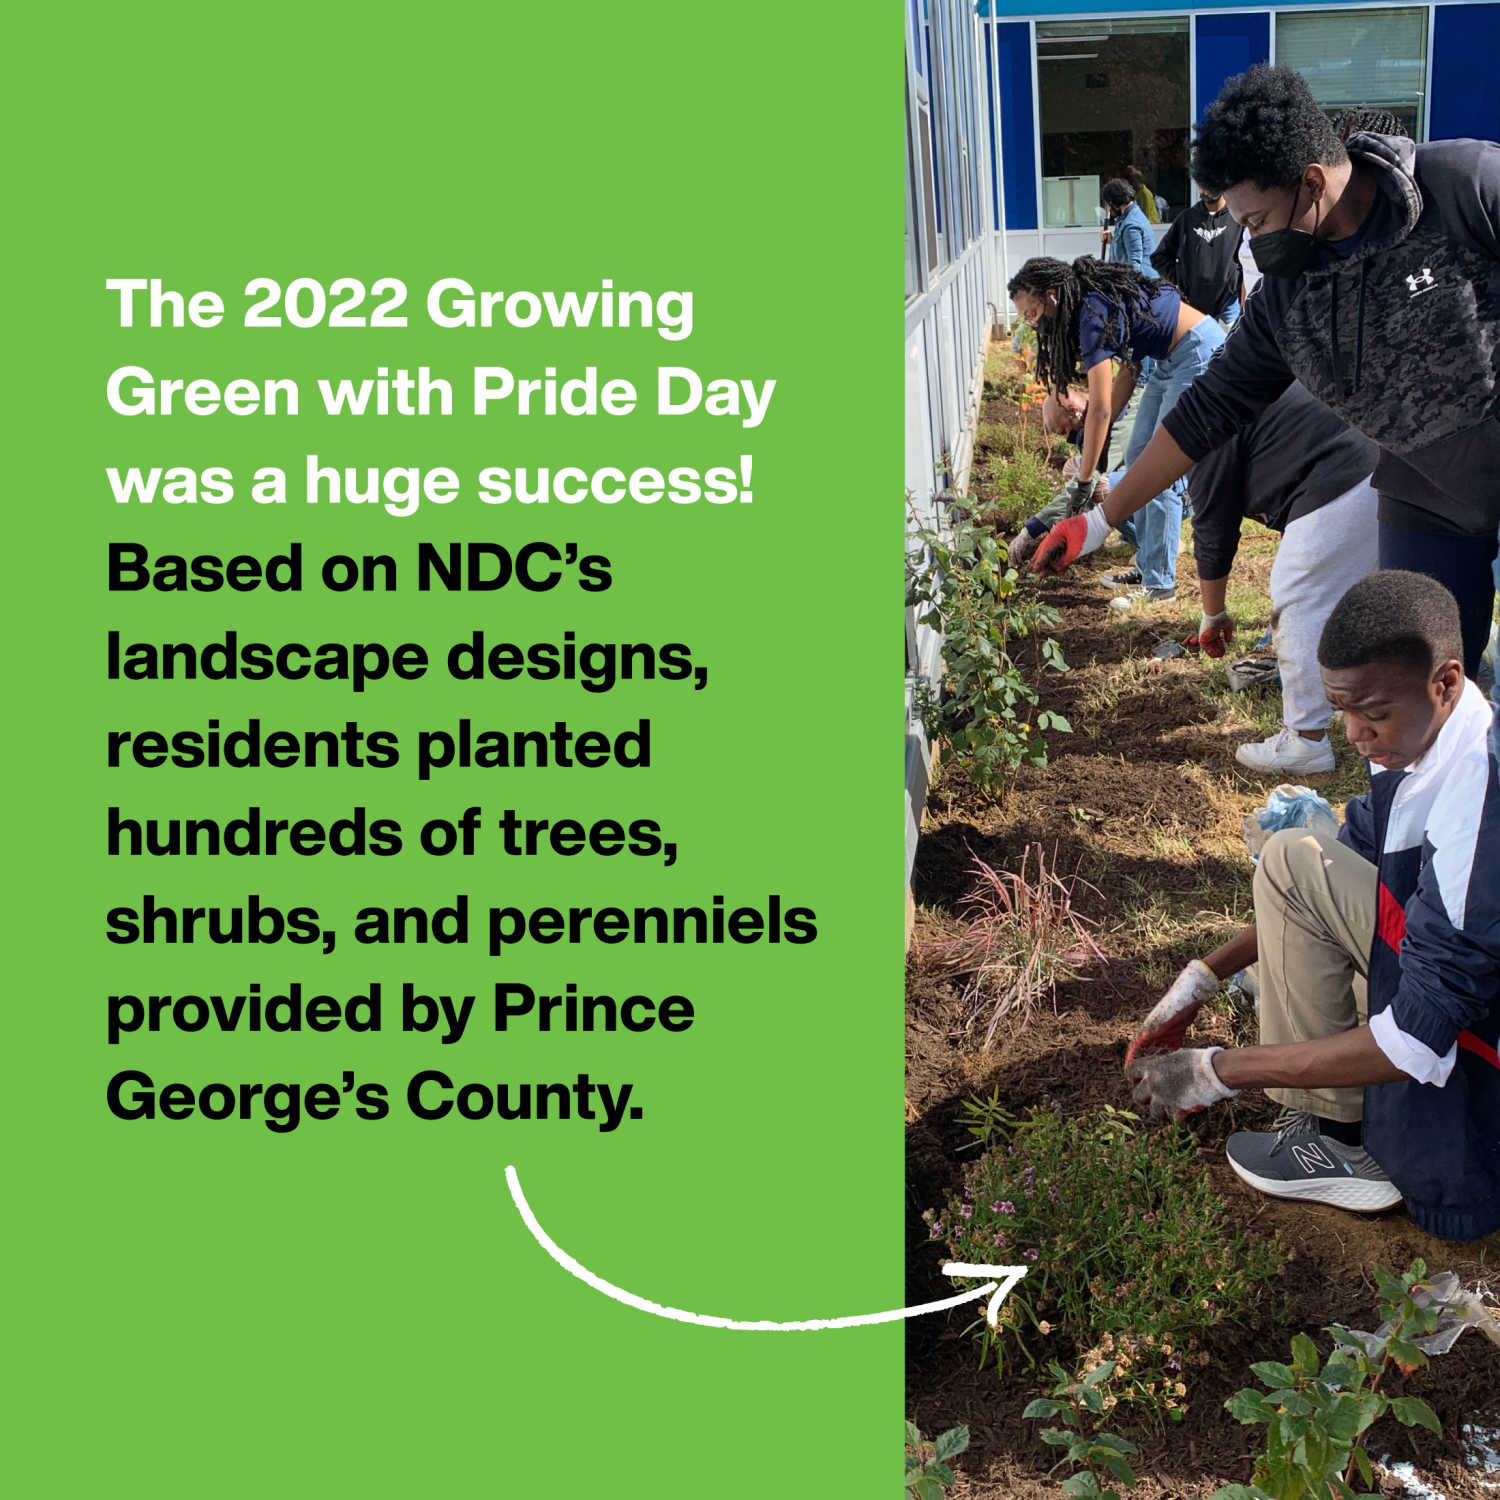 The 2022 Growing Green with Pride Day was a huge success! Based on NDC’s landscape designs, residents planted hundreds of trees, shrubs, and perennials provided by Prince George’s County.